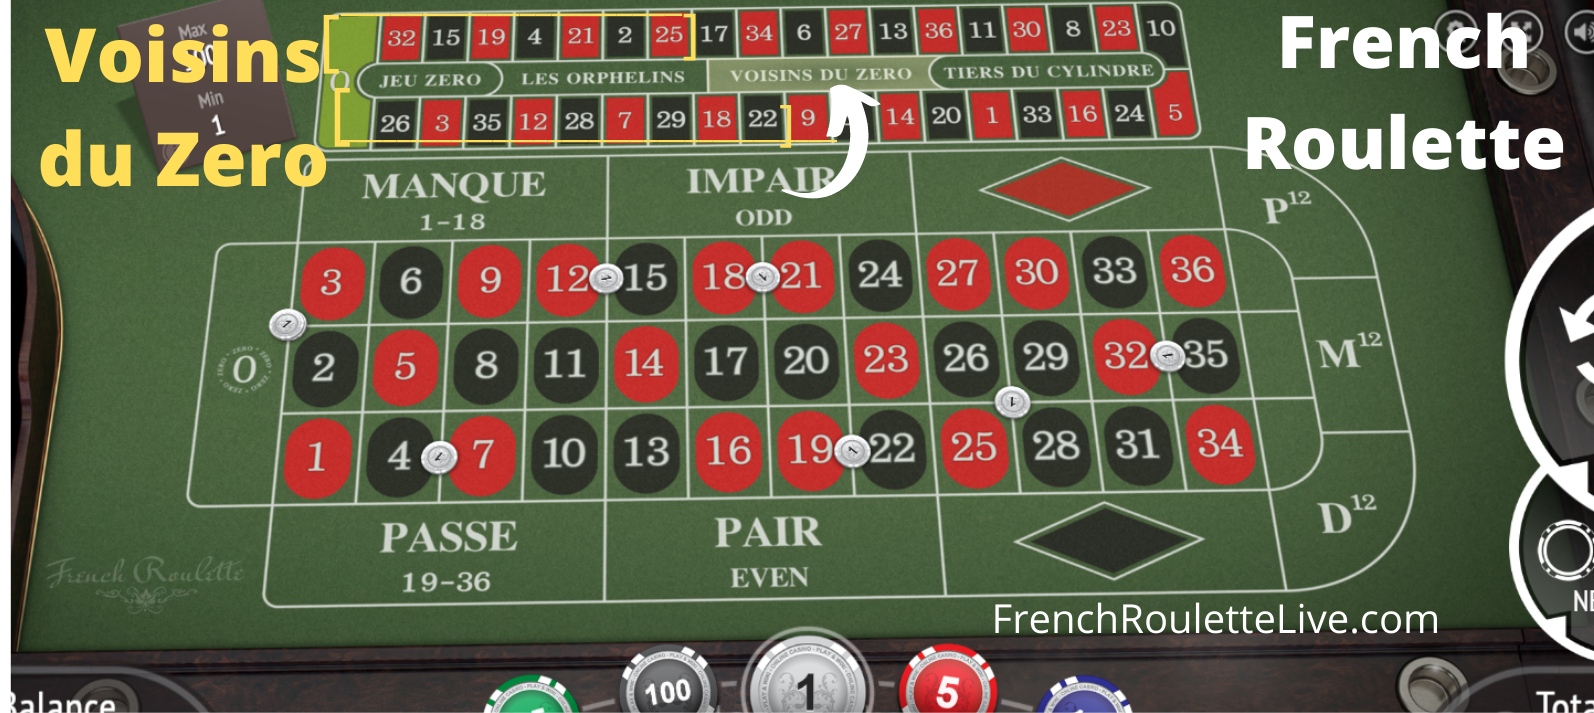 French Roulette - Special Bet - Voisins du Zero - Neighbours